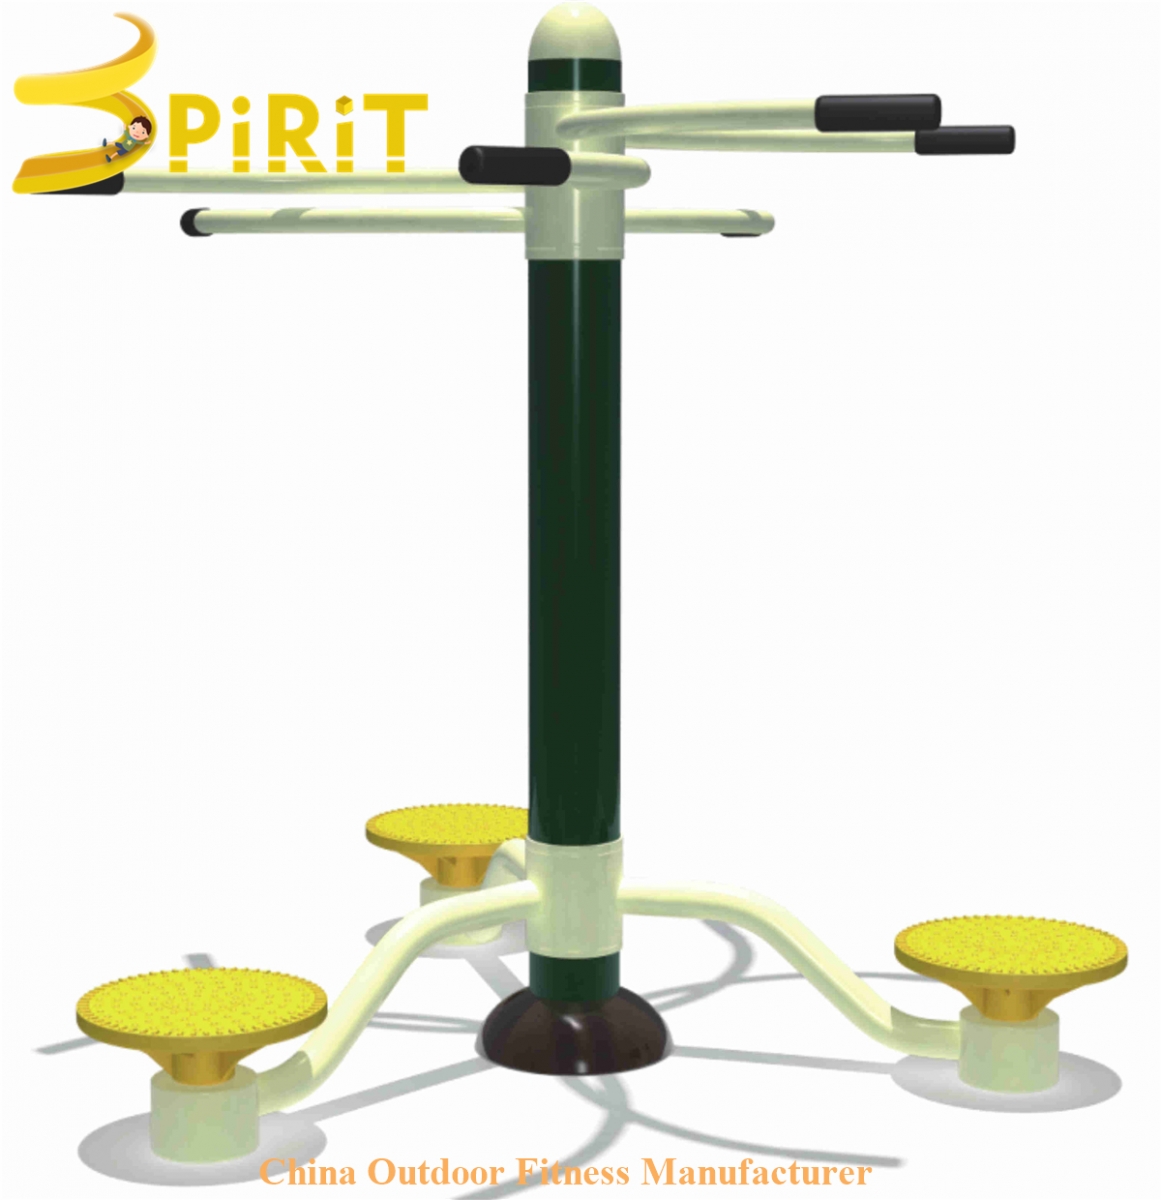 Good quality fitness equipment market in Delhi.-SPIRIT PLAY,Outdoor Playground, Indoor Playground,Trampoline Park,Outdoor Fitness,Inflatable,Soft Playground,Ninja Warrior,Trampoline Park,Playground Structure,Play Structure,Outdoor Fitness,Water Park,Play System,Freestanding,Interactive,independente ,Inklusibo, Park, Pagsaka sa Bungbong, Dula sa Bata